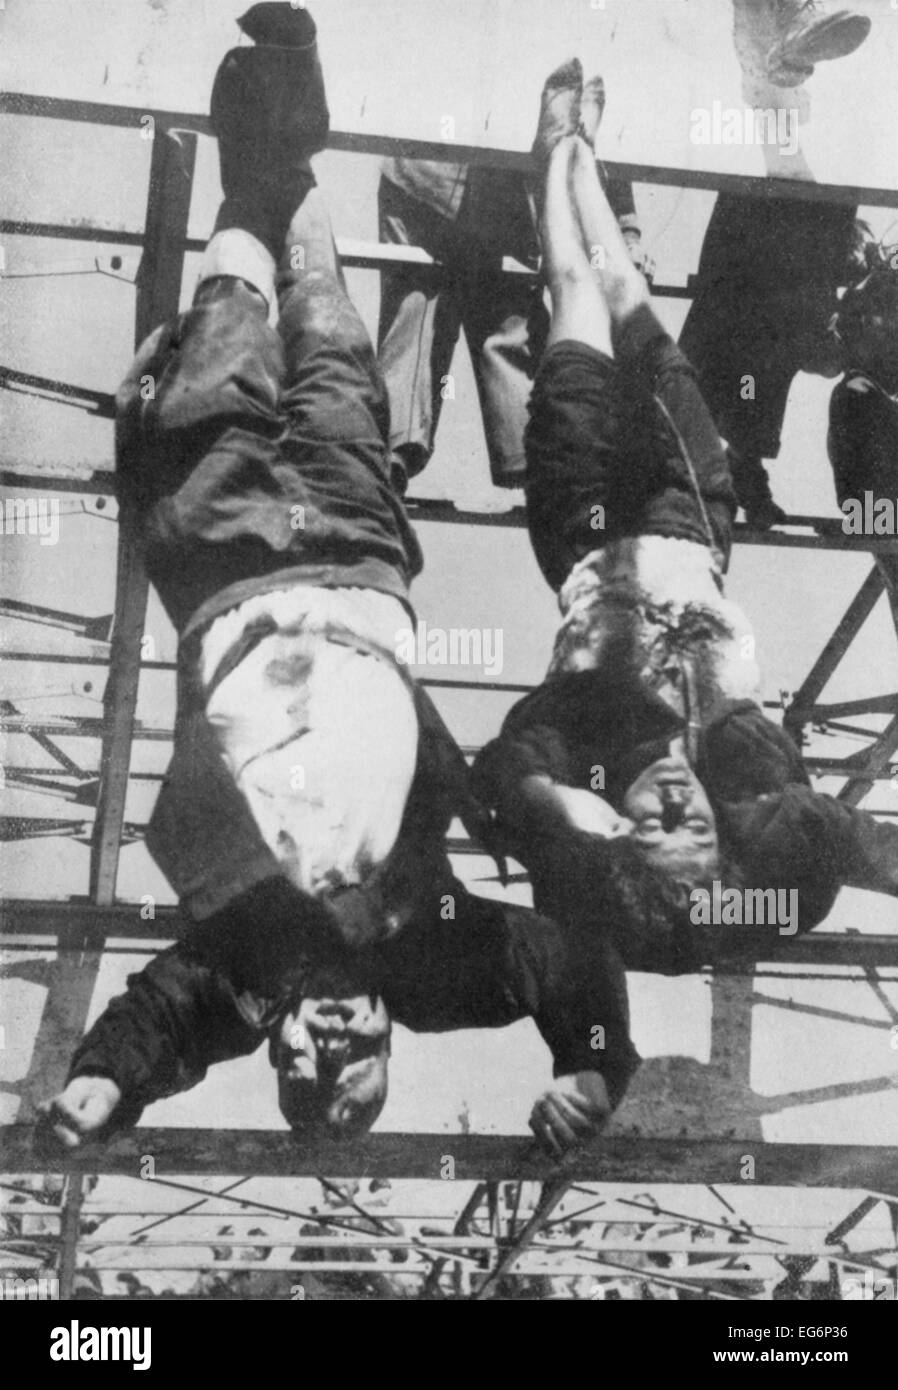 Executed Benito Mussolini and mistress, Clara Petacci, hanging by feet. Milan, Italy, May 1945. World War 2. (BSLOC 2014 10 54) Stock Photo